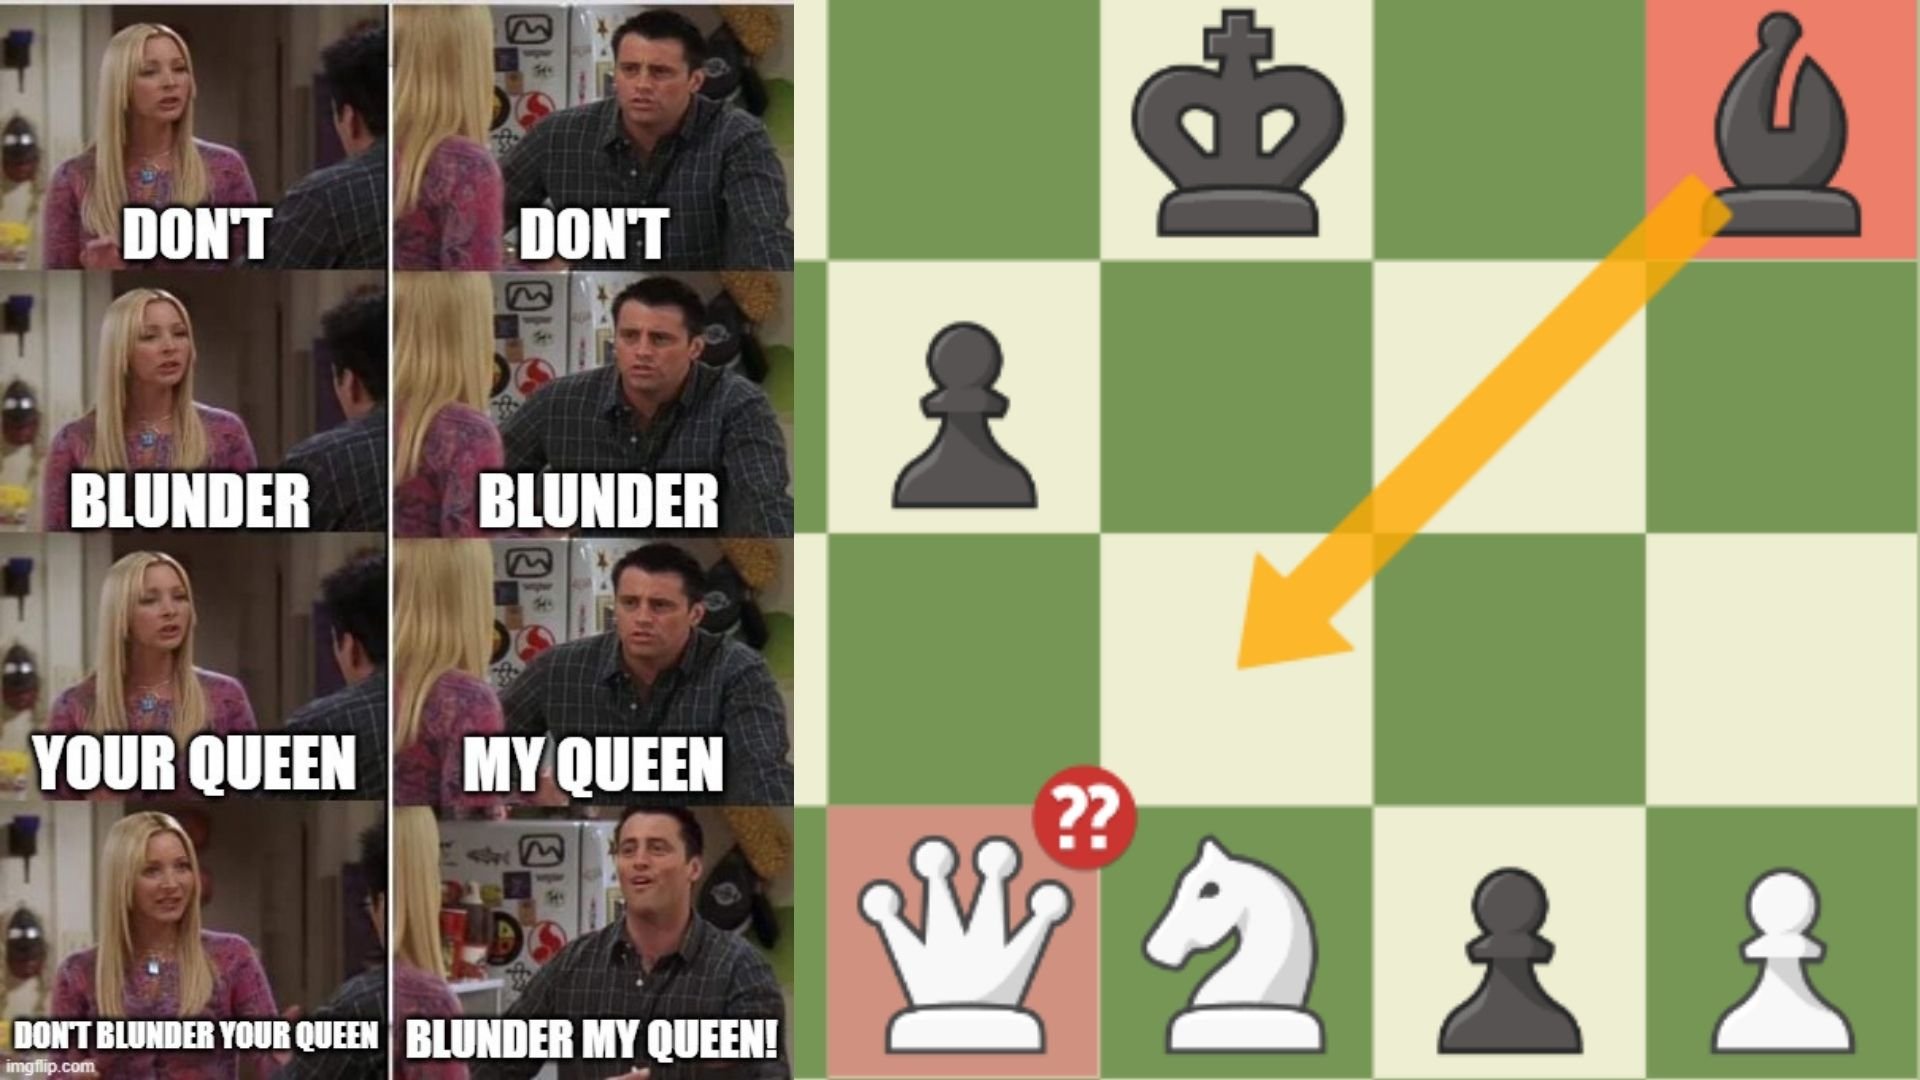 I blundered my queen